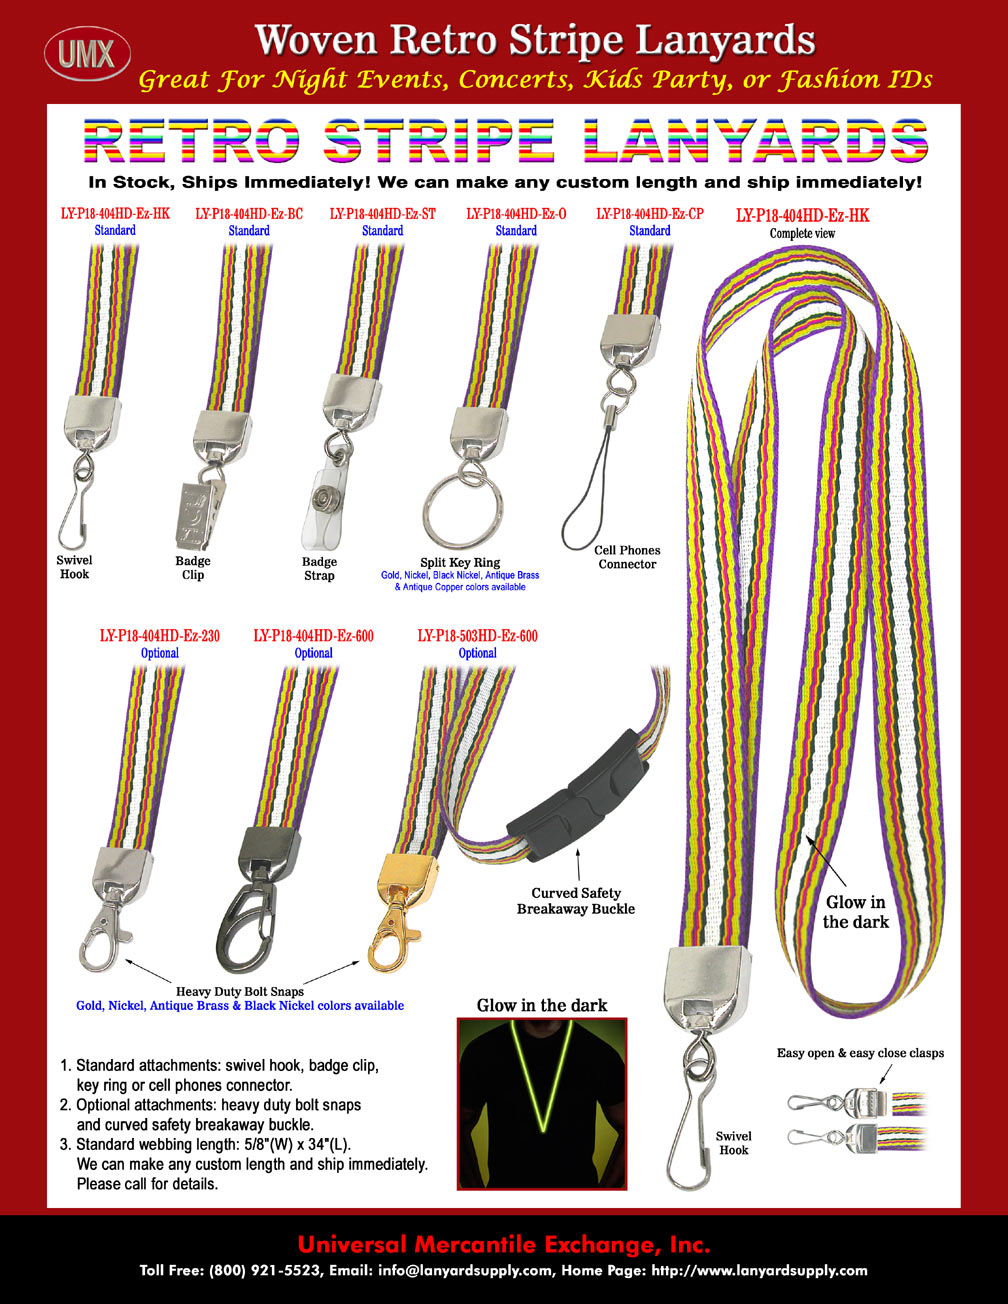 Cool And Uniquely Designed Glow-In-The-Dark Series: Woven Retro Stripe Badge Holder Neck Lanyards